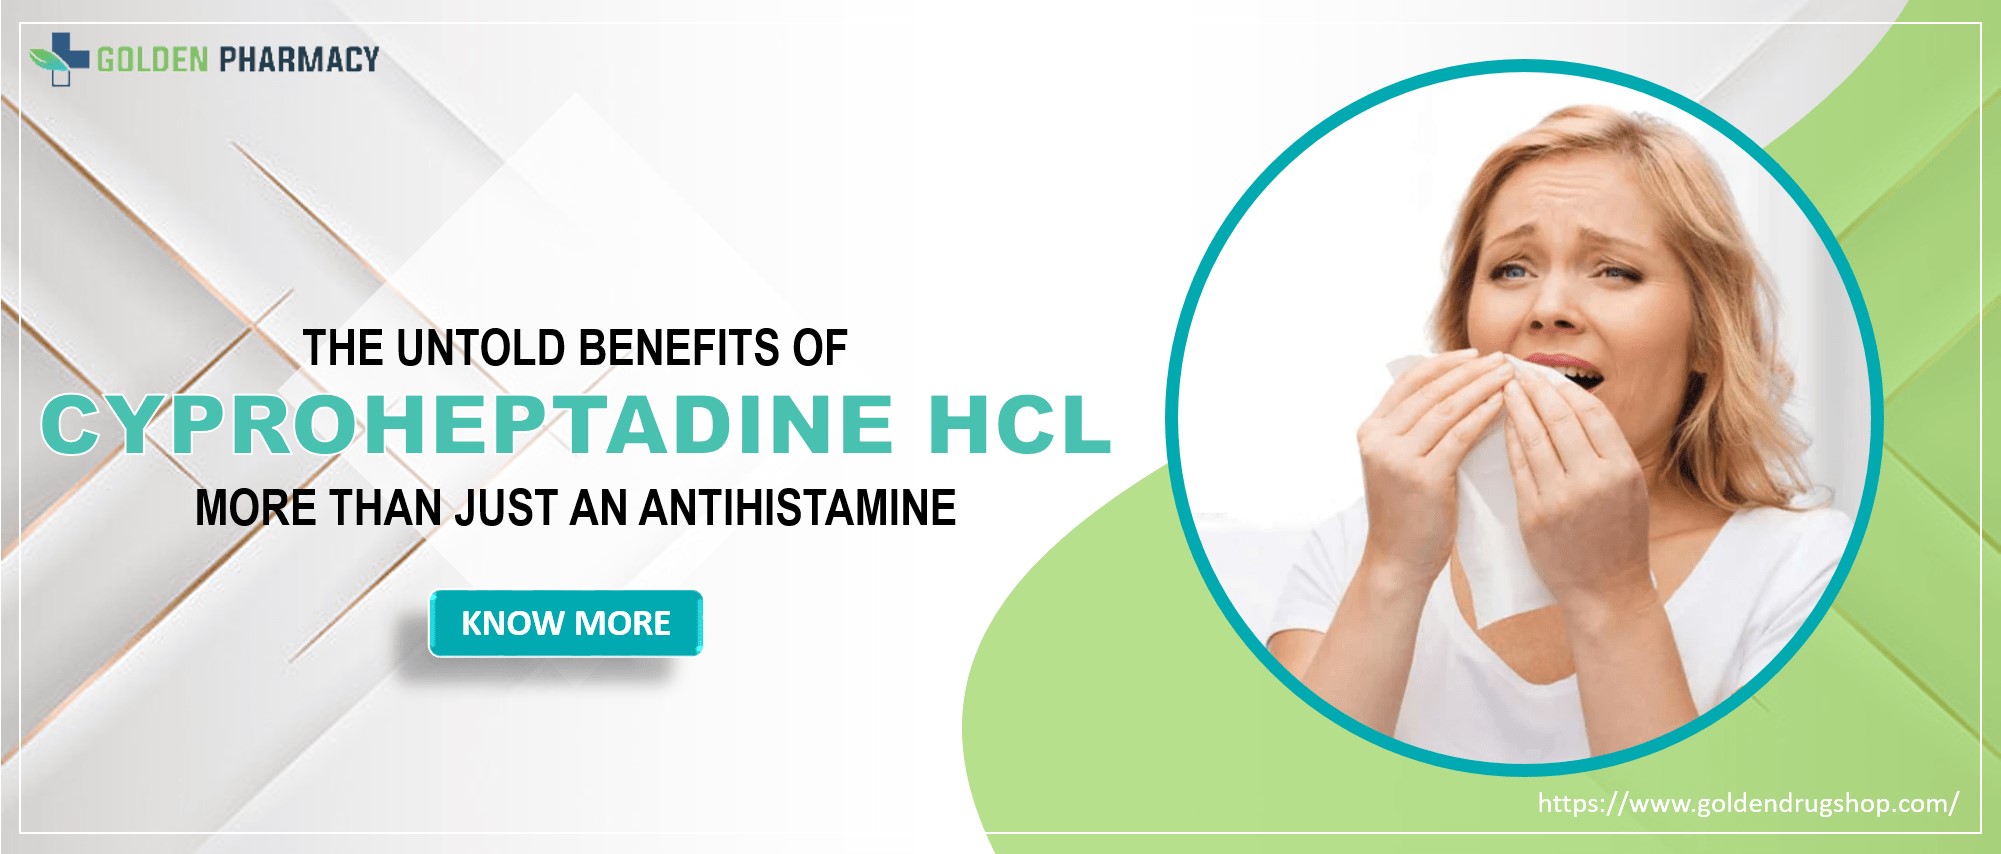 The Untold Benefits of Cyproheptadine HCL: More than Just an Antihistamine